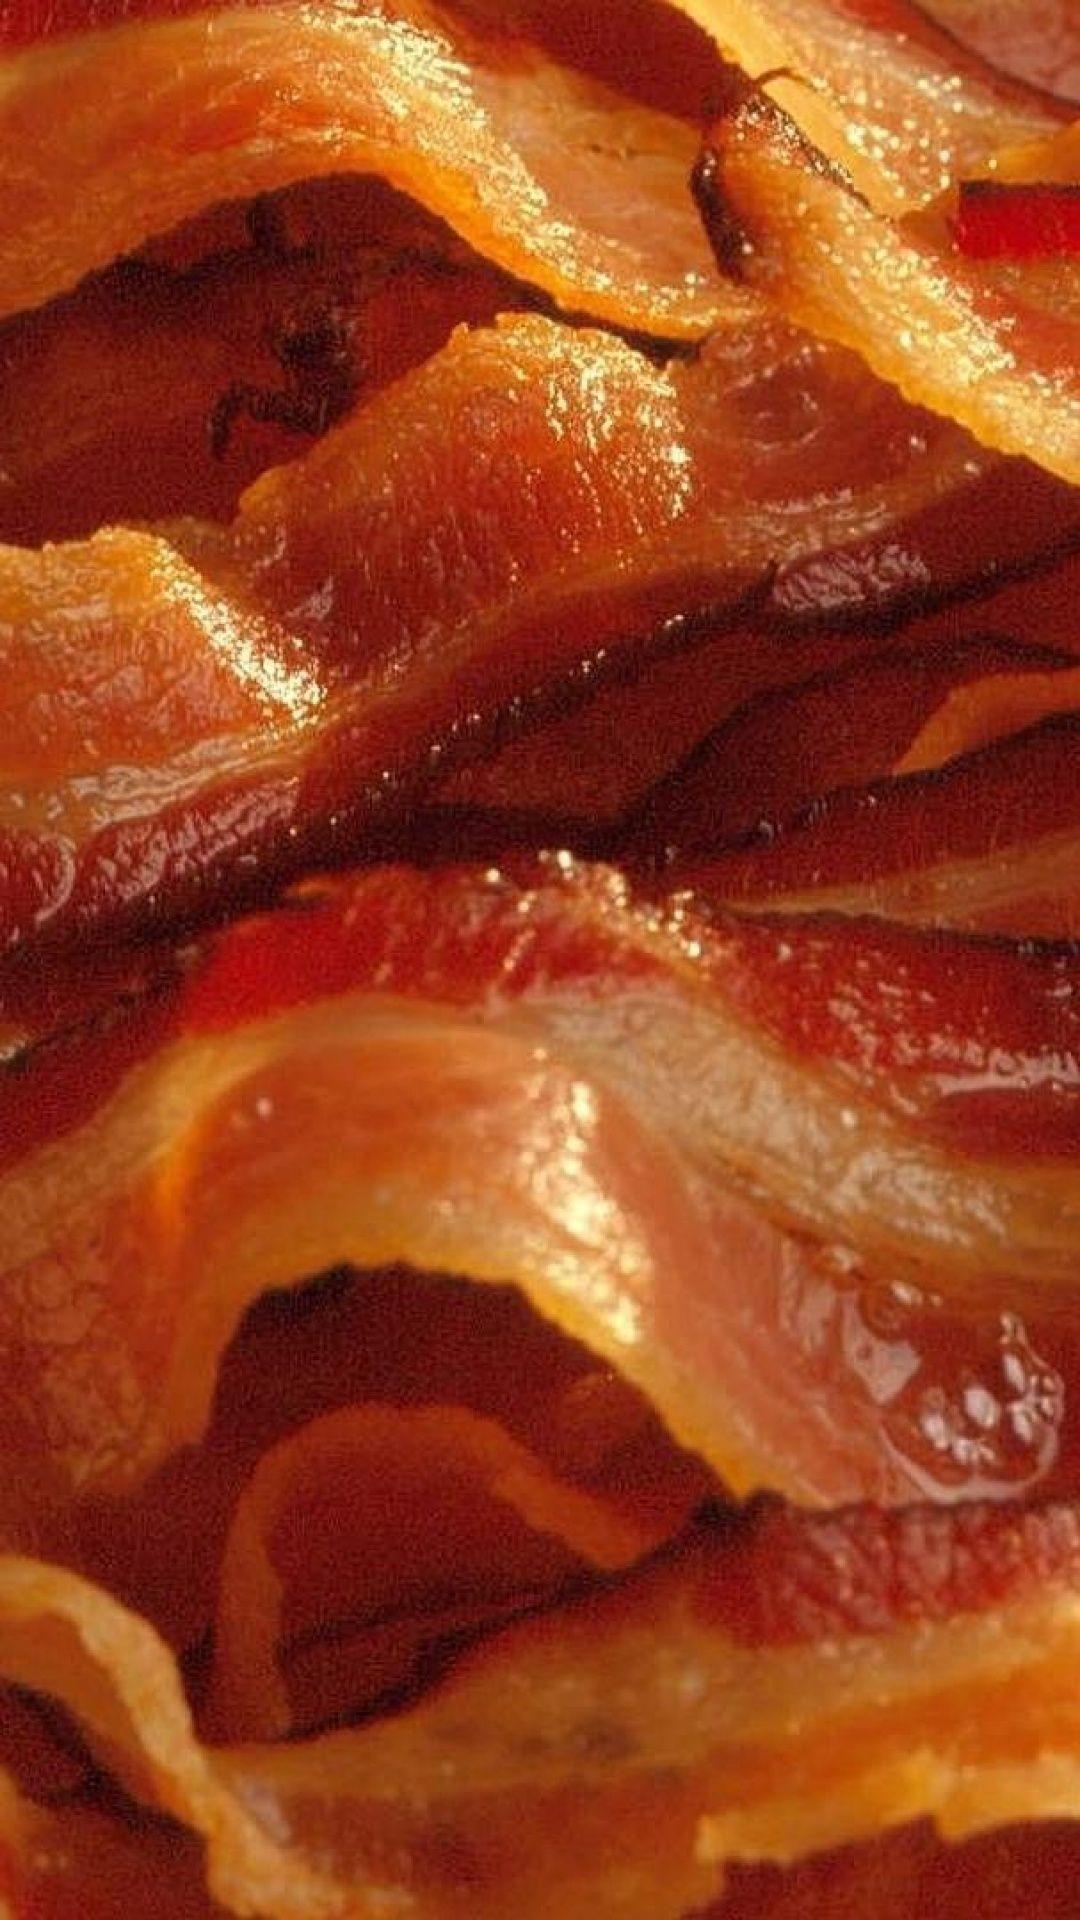 Bacon Wallpapers - Wallpaper Cave